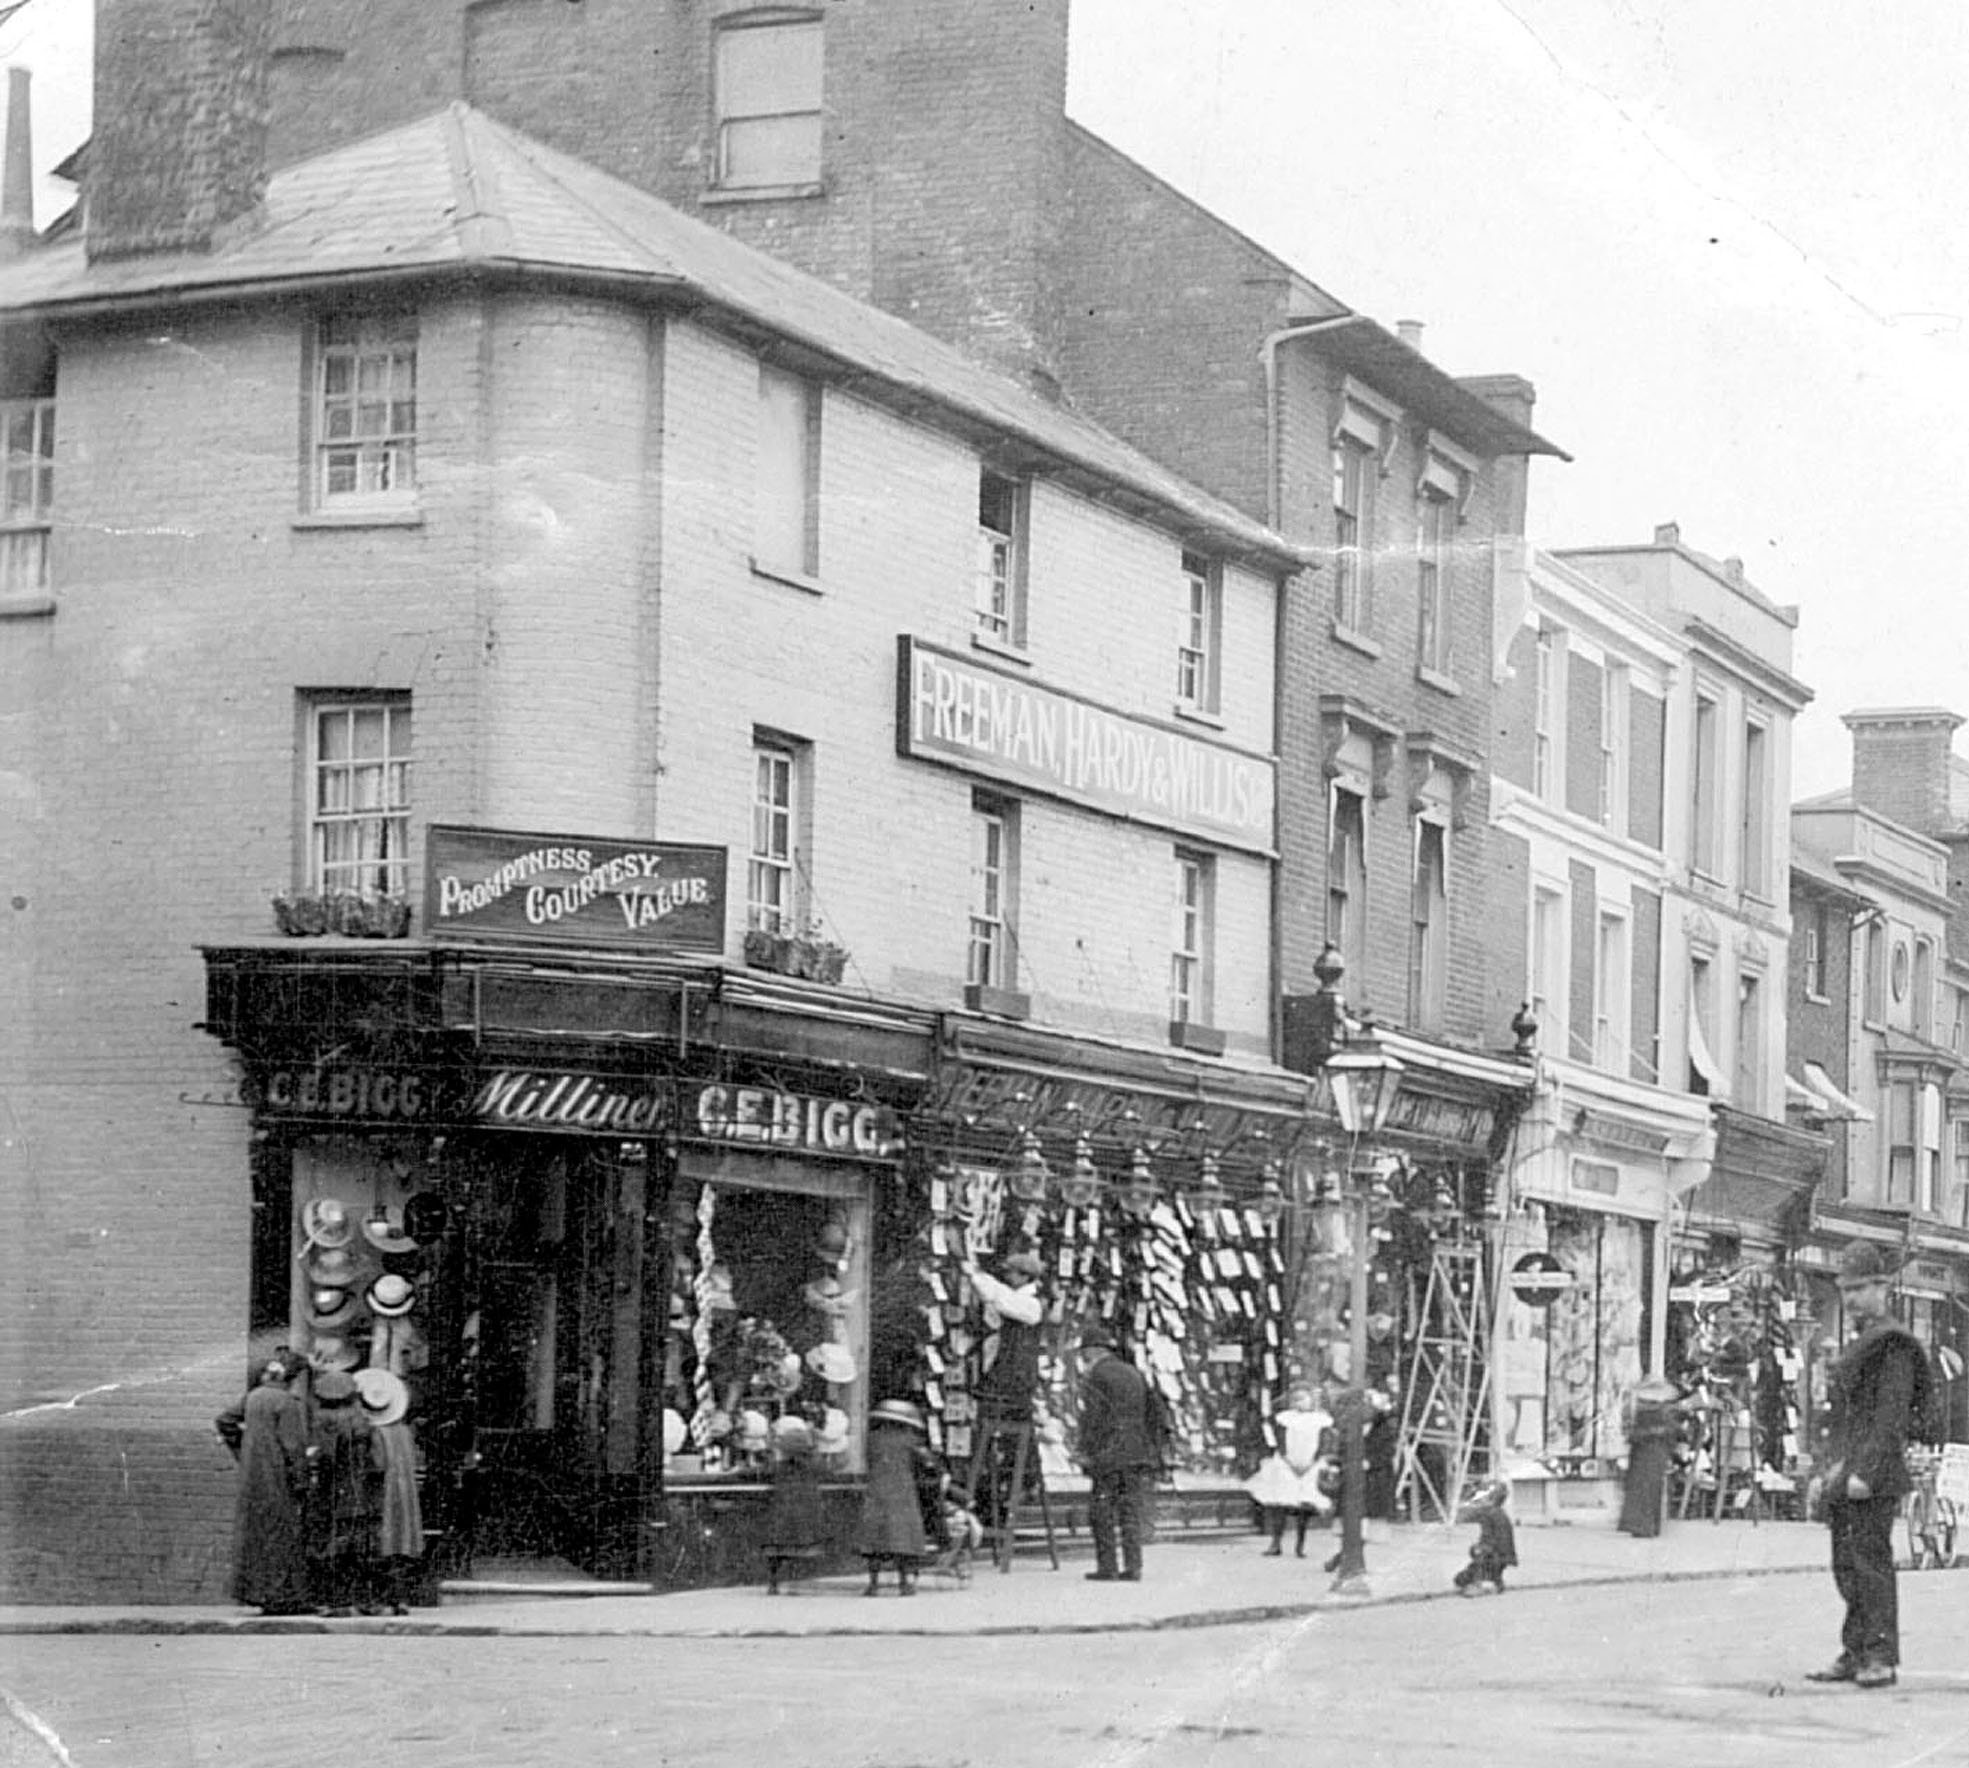 A photo showing the corner of church street with shops and people.